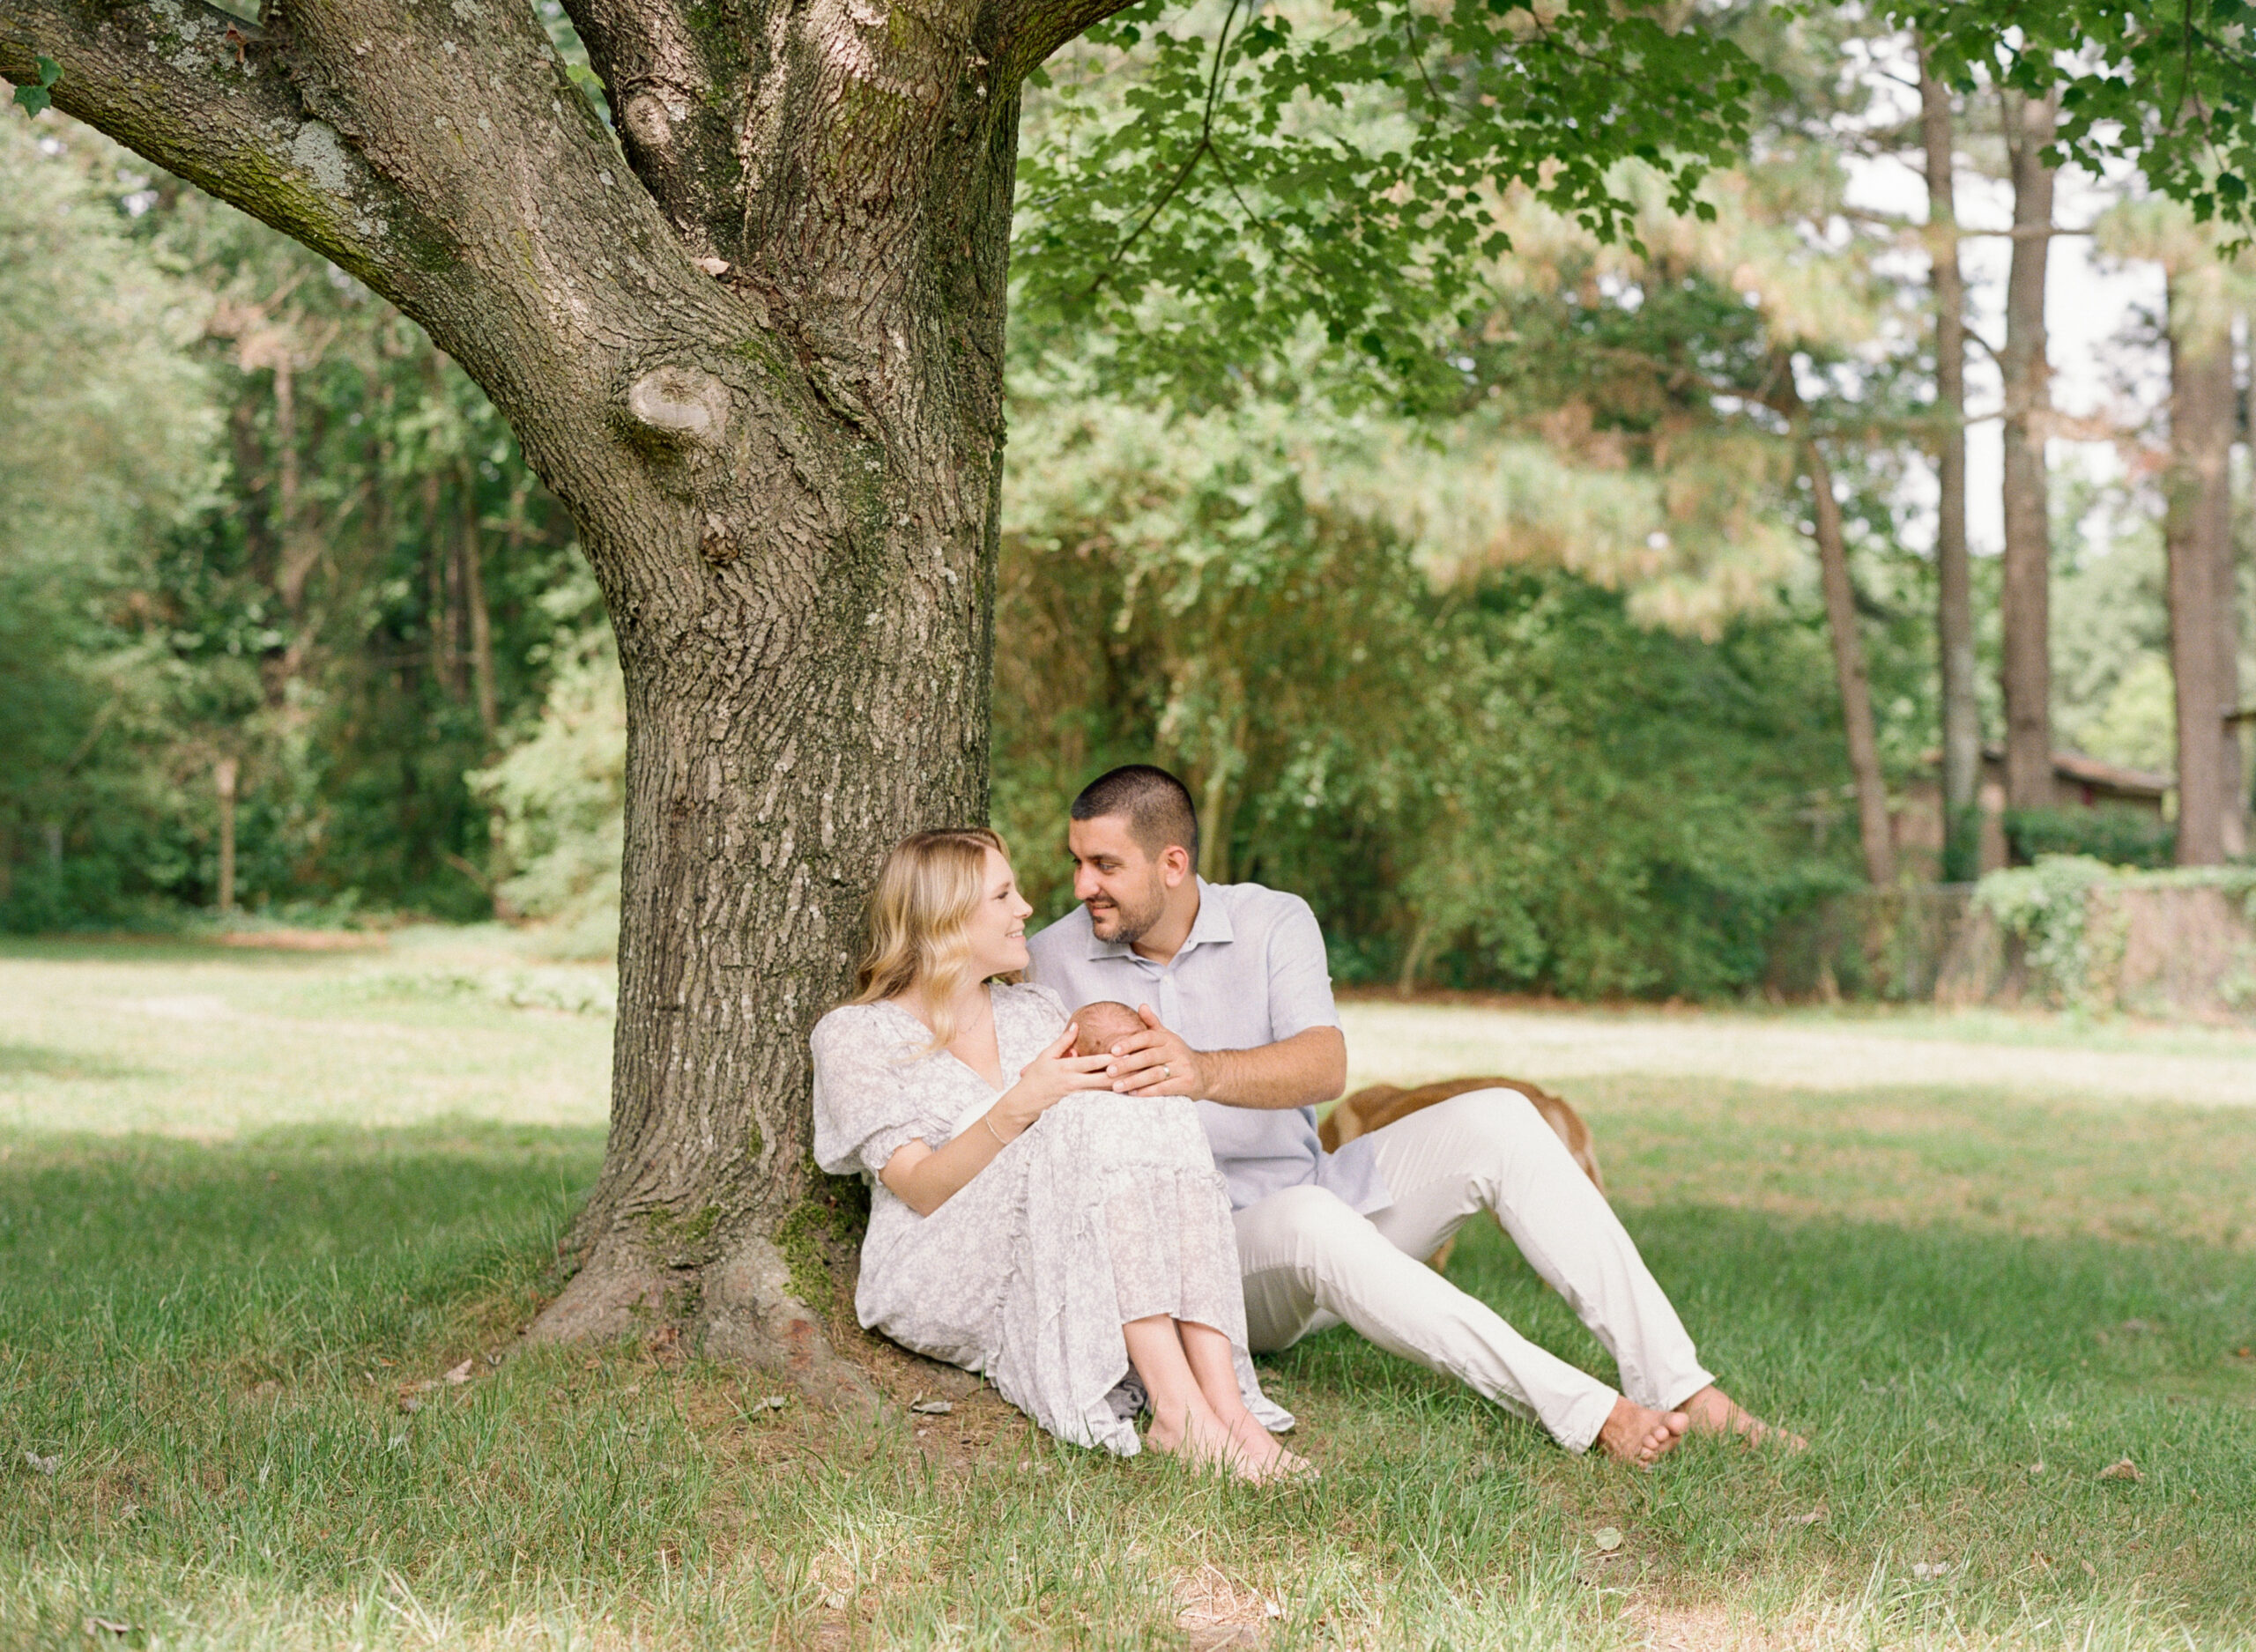 New parents sit under a tree holding their newborn son during his photo session. Image by newborn photographers in Raleigh A.J. Dunlap Photography.